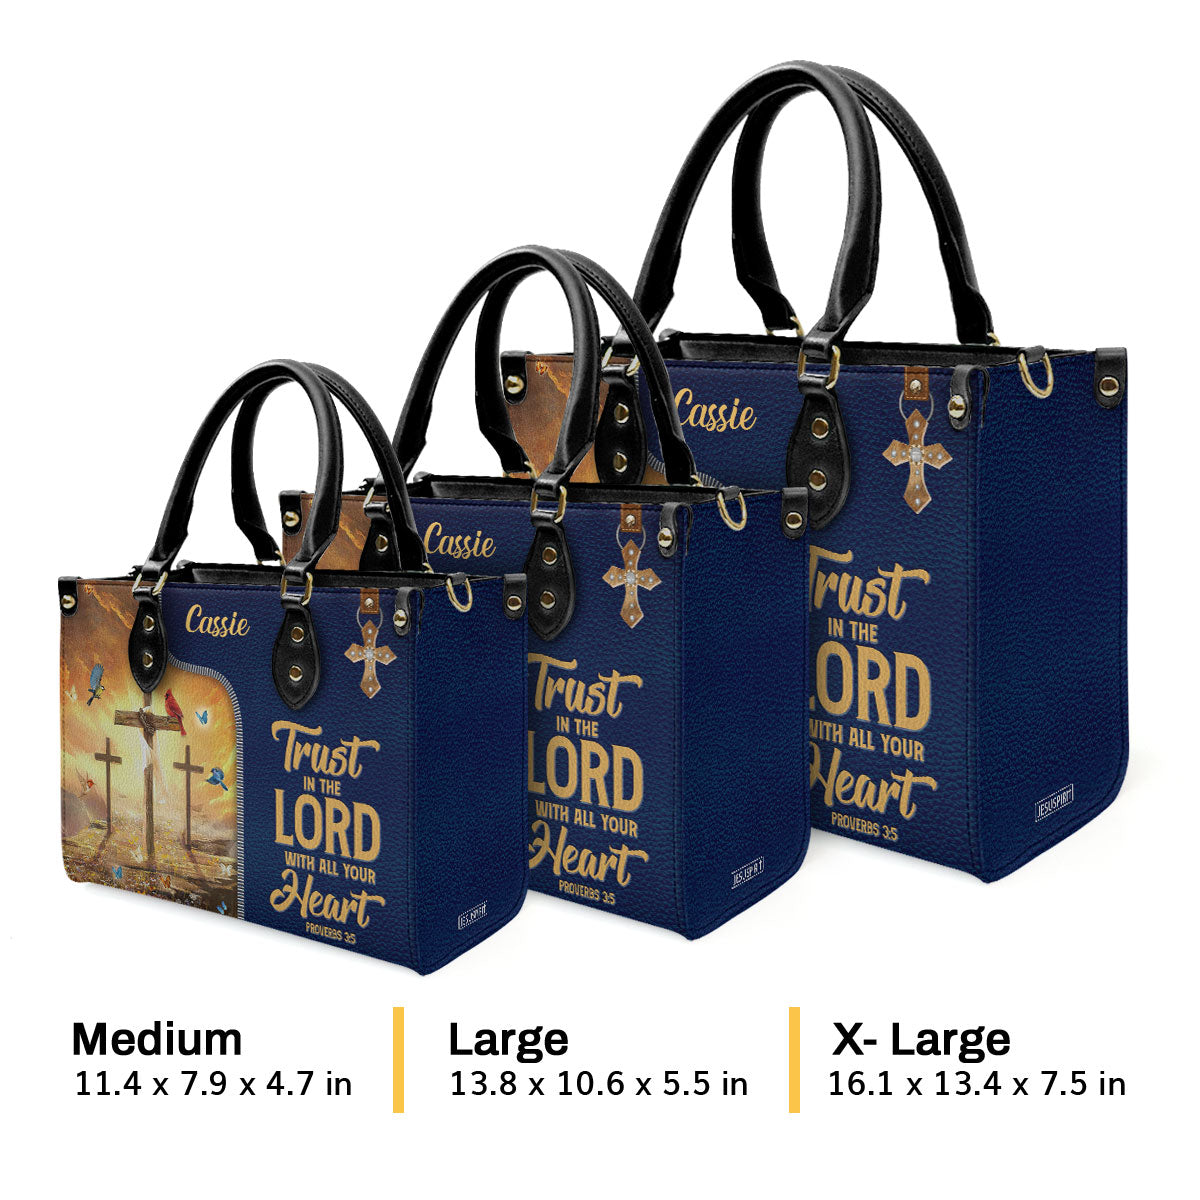 Trust In The Lord With All Your Heart - Awesome Personalized Leather Handbag NUM500